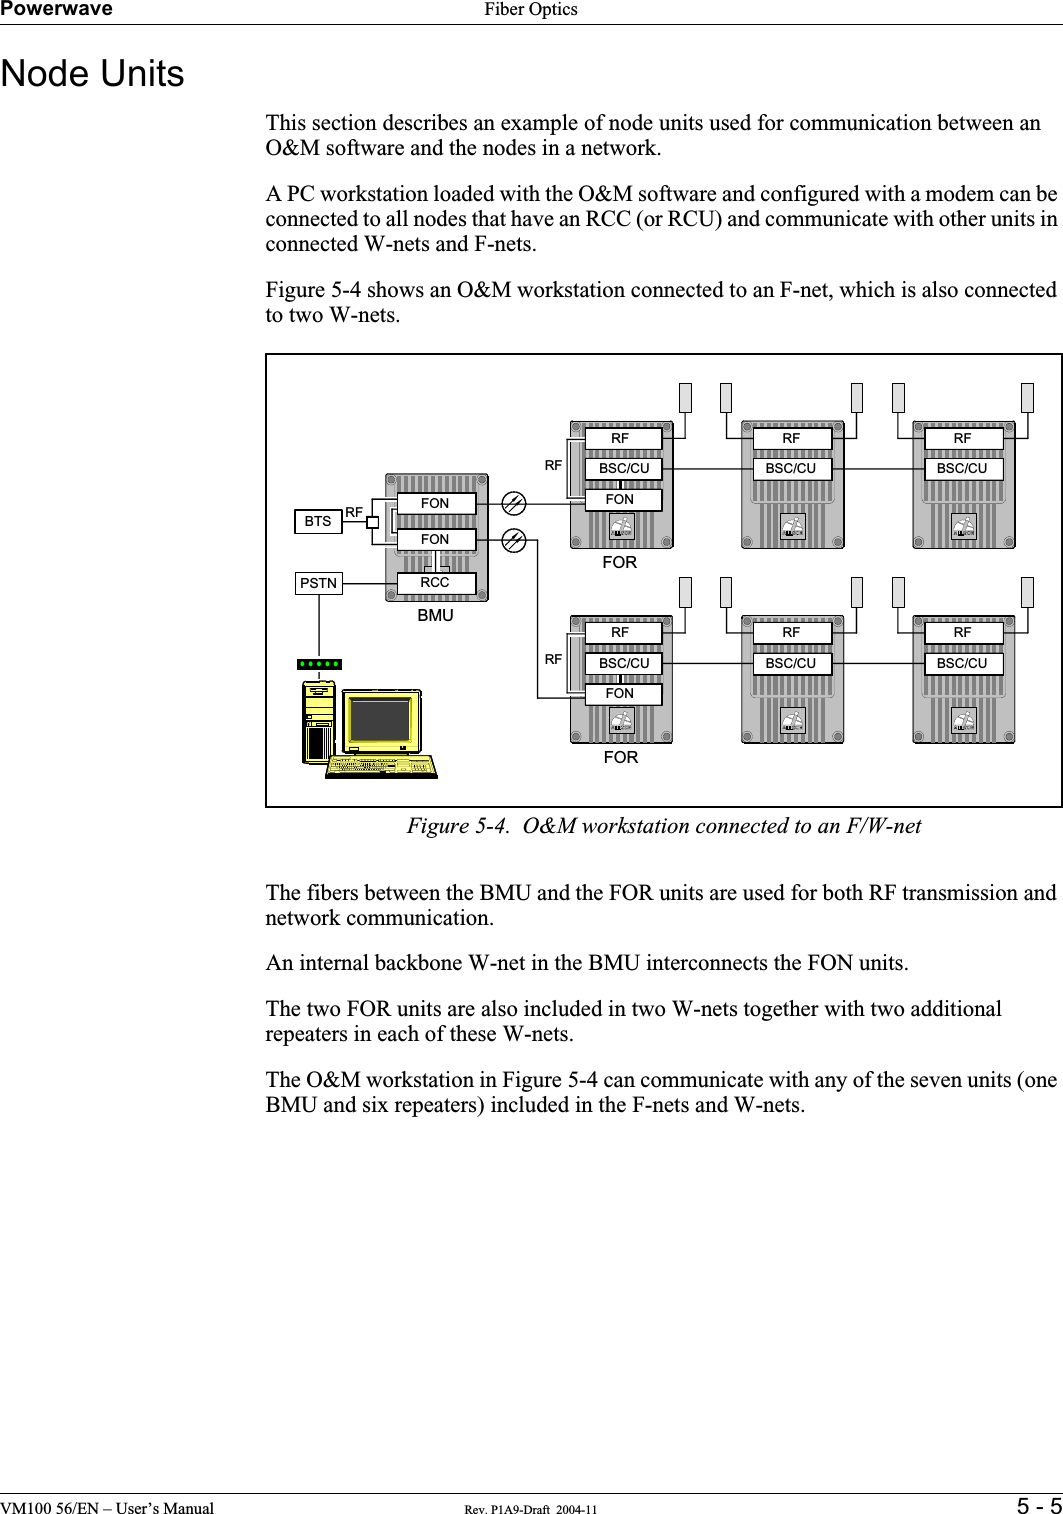 Powerwave Fiber OpticsVM100 56/EN – User’s Manual Rev. P1A9-Draft  2004-11 5 - 5Node UnitsThis section describes an example of node units used for communication between an O&amp;M software and the nodes in a network.A PC workstation loaded with the O&amp;M software and configured with a modem can be connected to all nodes that have an RCC (or RCU) and communicate with other units in connected W-nets and F-nets.Figure 5-4 shows an O&amp;M workstation connected to an F-net, which is also connected to two W-nets.Figure 5-4.  O&amp;M workstation connected to an F/W-netThe fibers between the BMU and the FOR units are used for both RF transmission and network communication.An internal backbone W-net in the BMU interconnects the FON units.The two FOR units are also included in two W-nets together with two additional repeaters in each of these W-nets.The O&amp;M workstation in Figure 5-4 can communicate with any of the seven units (one BMU and six repeaters) included in the F-nets and W-nets.RCCBSC/CUBSC/CURFRFRFRFRFBMUFORFONFONRFFONRFFONRFRF BSC/CUBSC/CUBSC/CUBSC/CUFORPSTNBTS